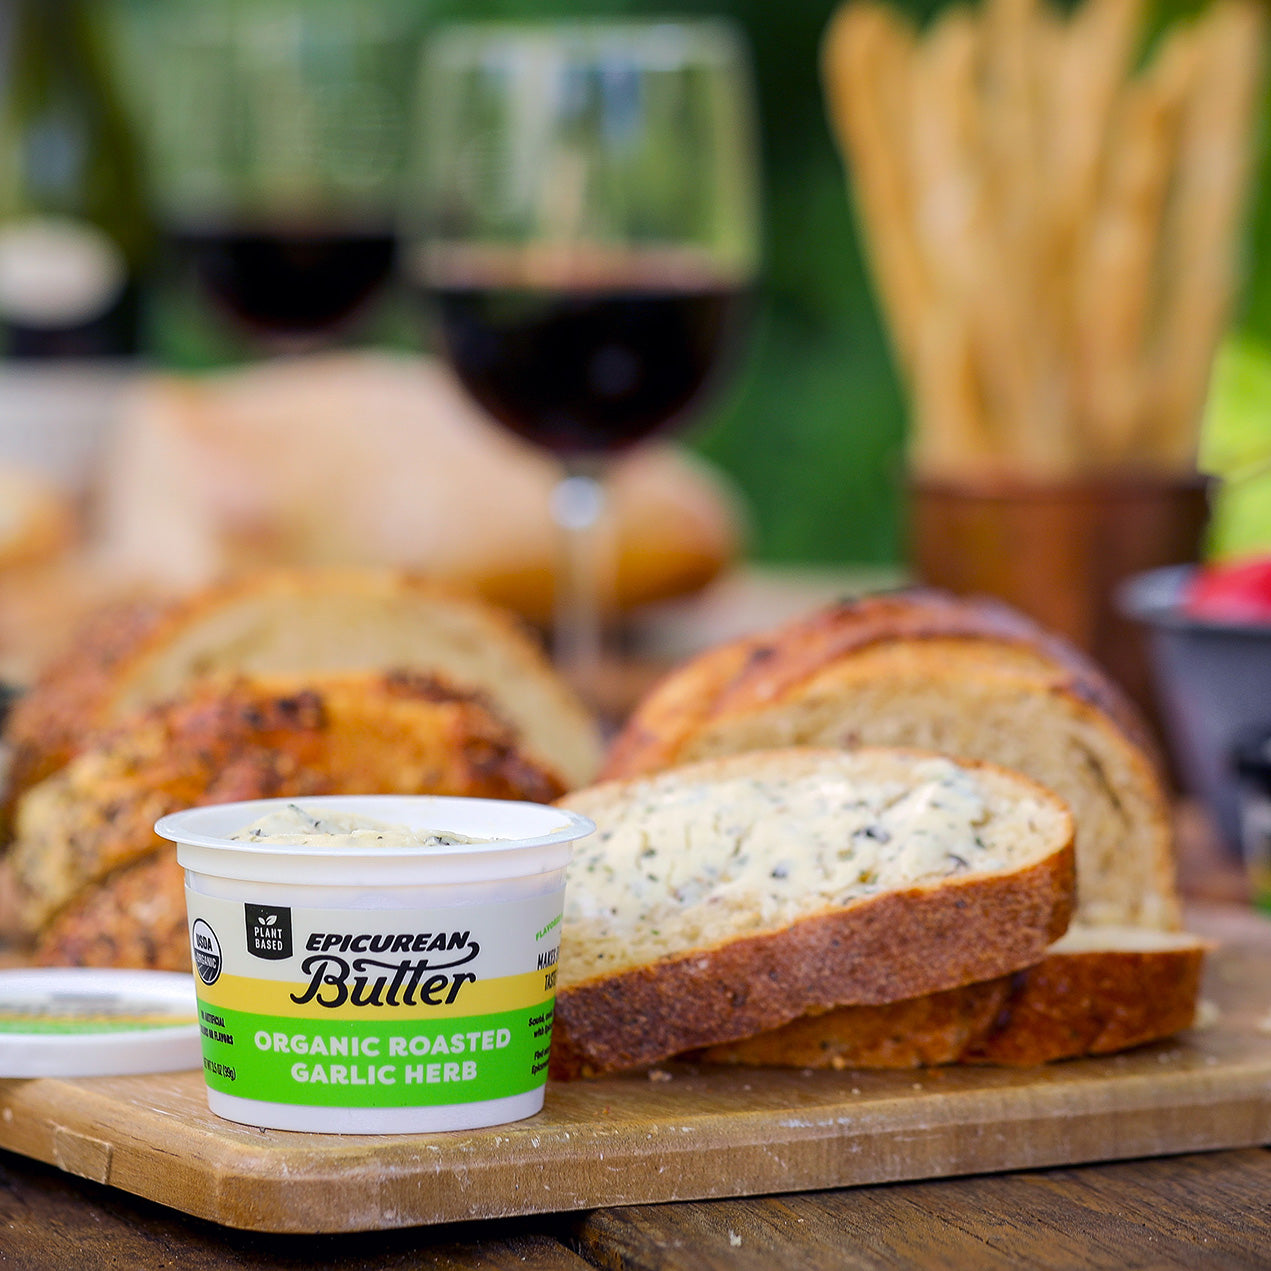 Organic Roasted Garlic Herb Flavored Plant Butter with bread and wine